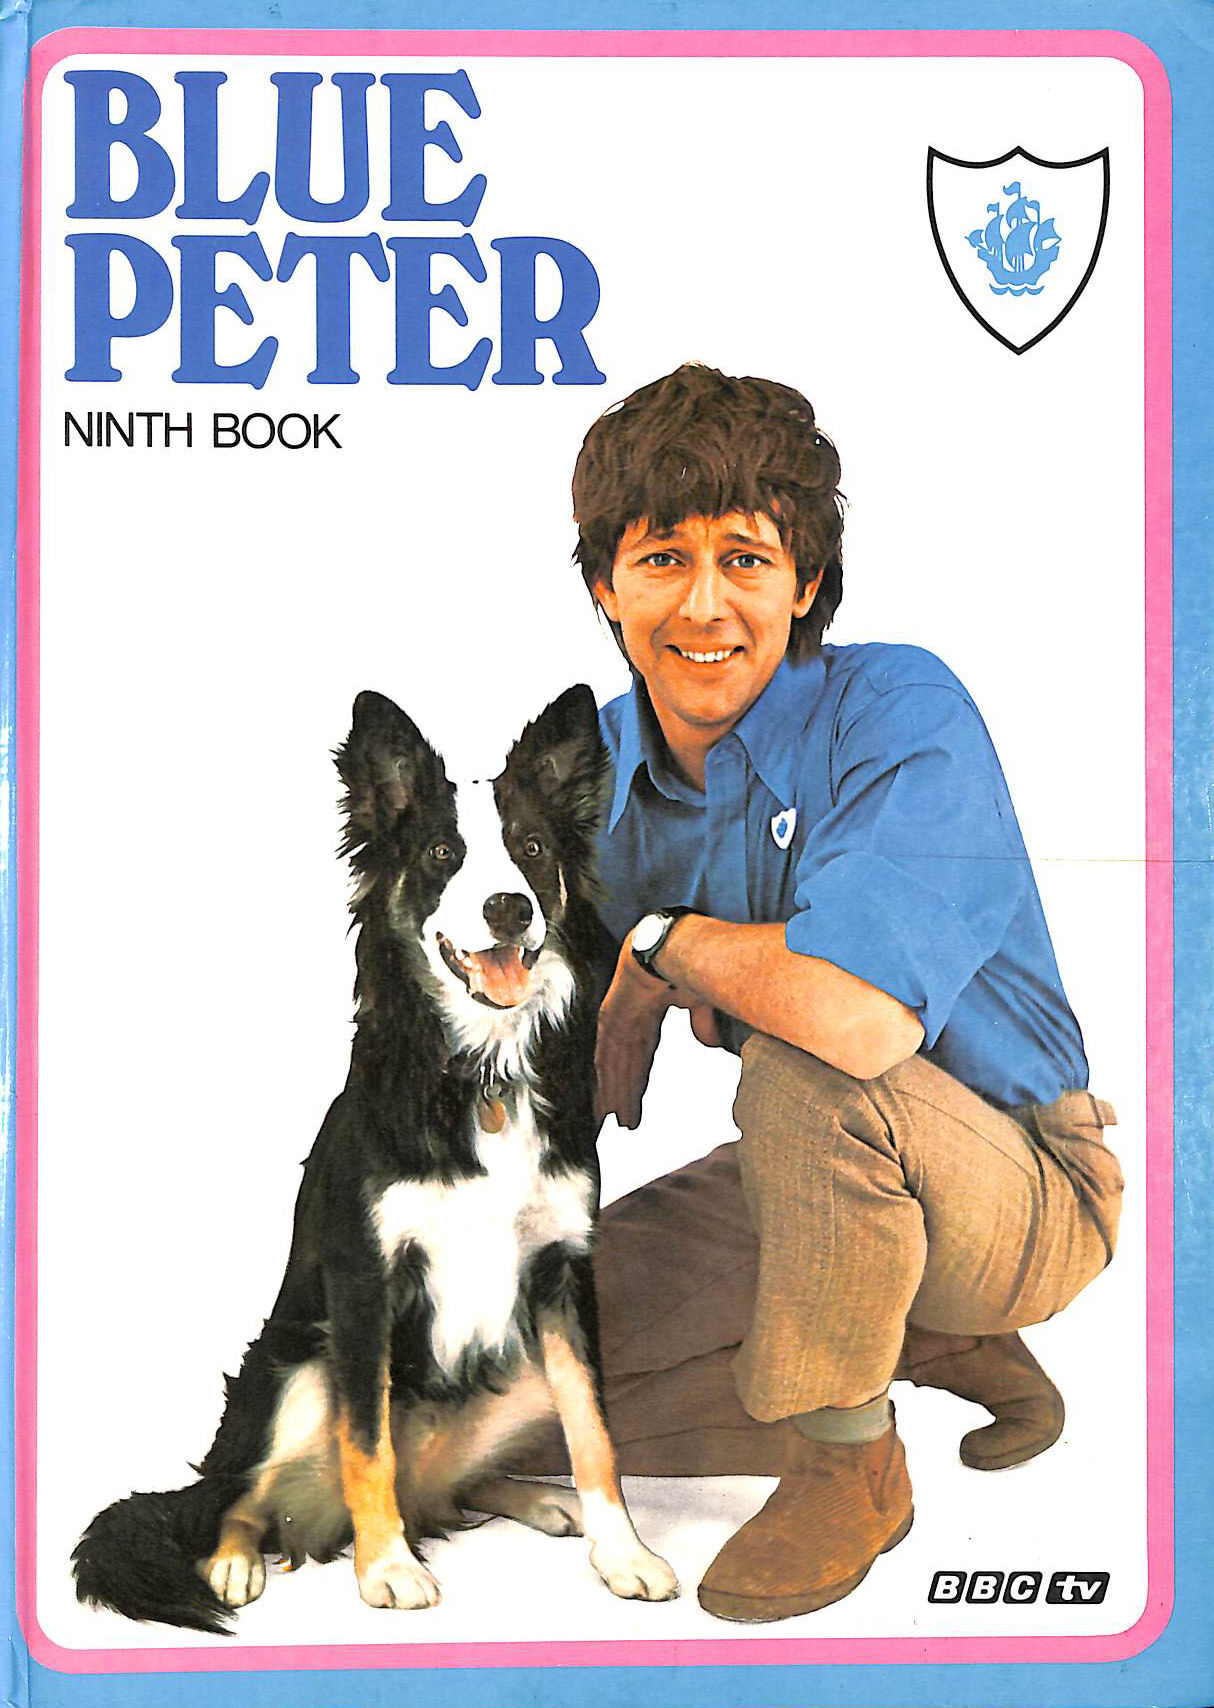 BIDDY BAXTER [EDITOR] - The Book of Blue Peter 9 (Annual)